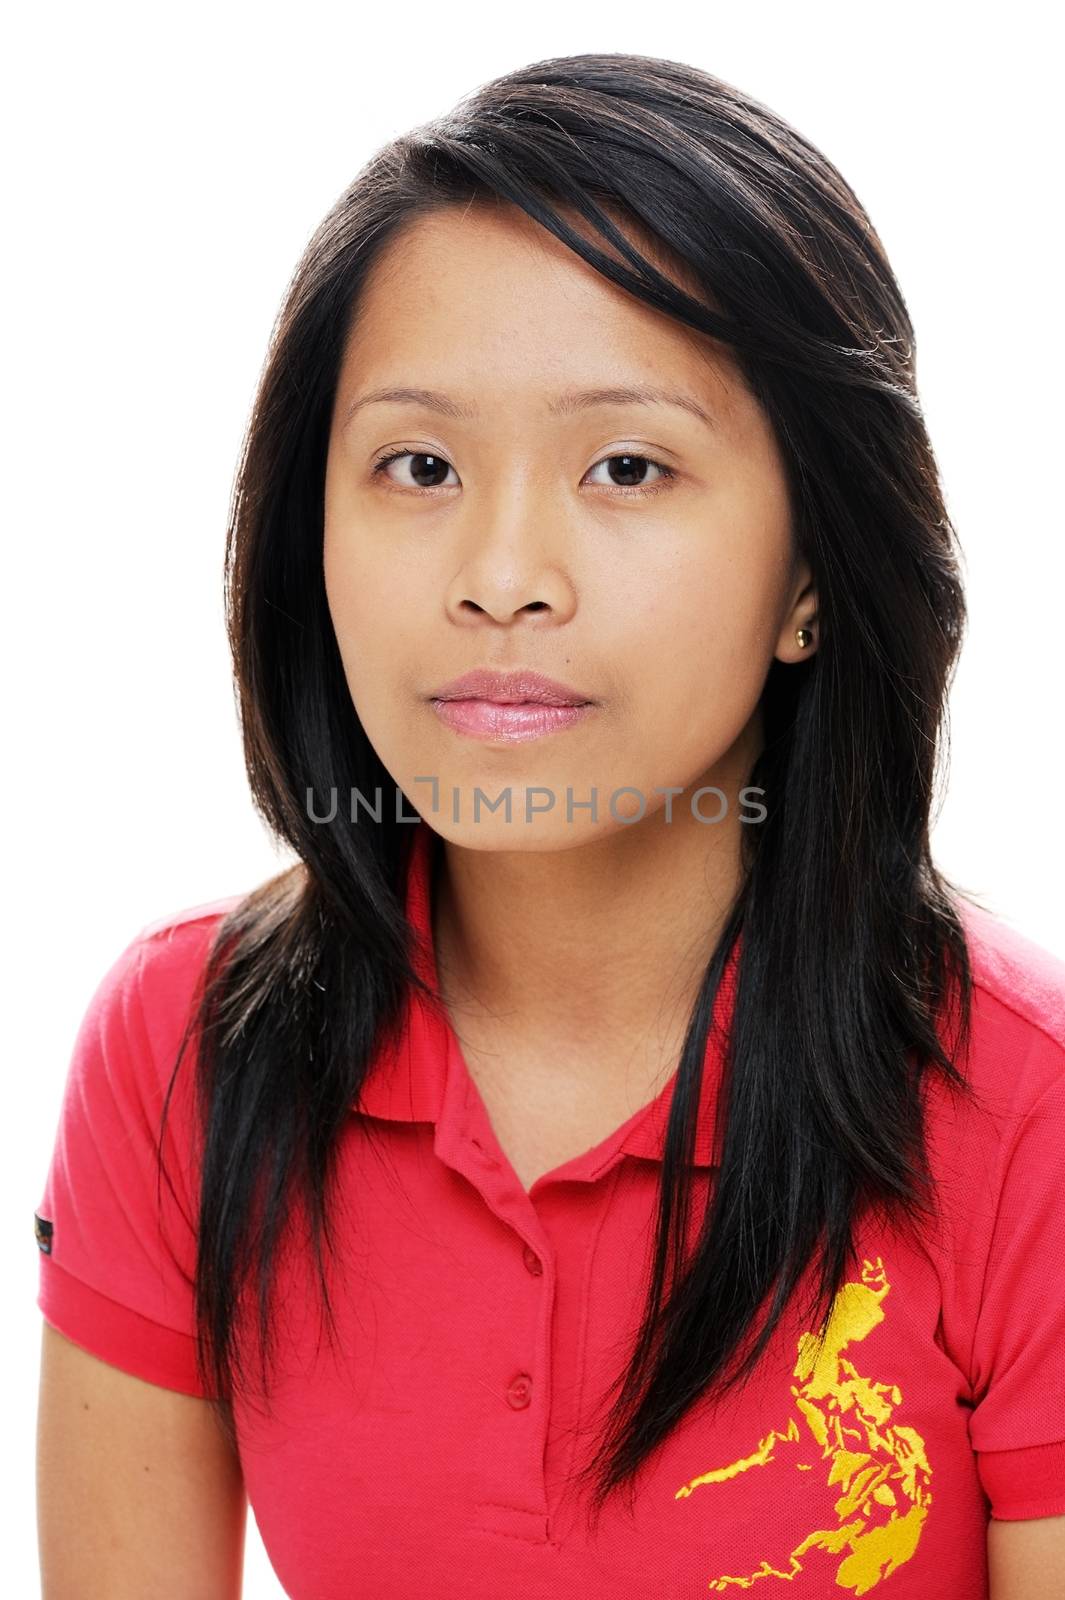 Asian girl looking serious in red shirt